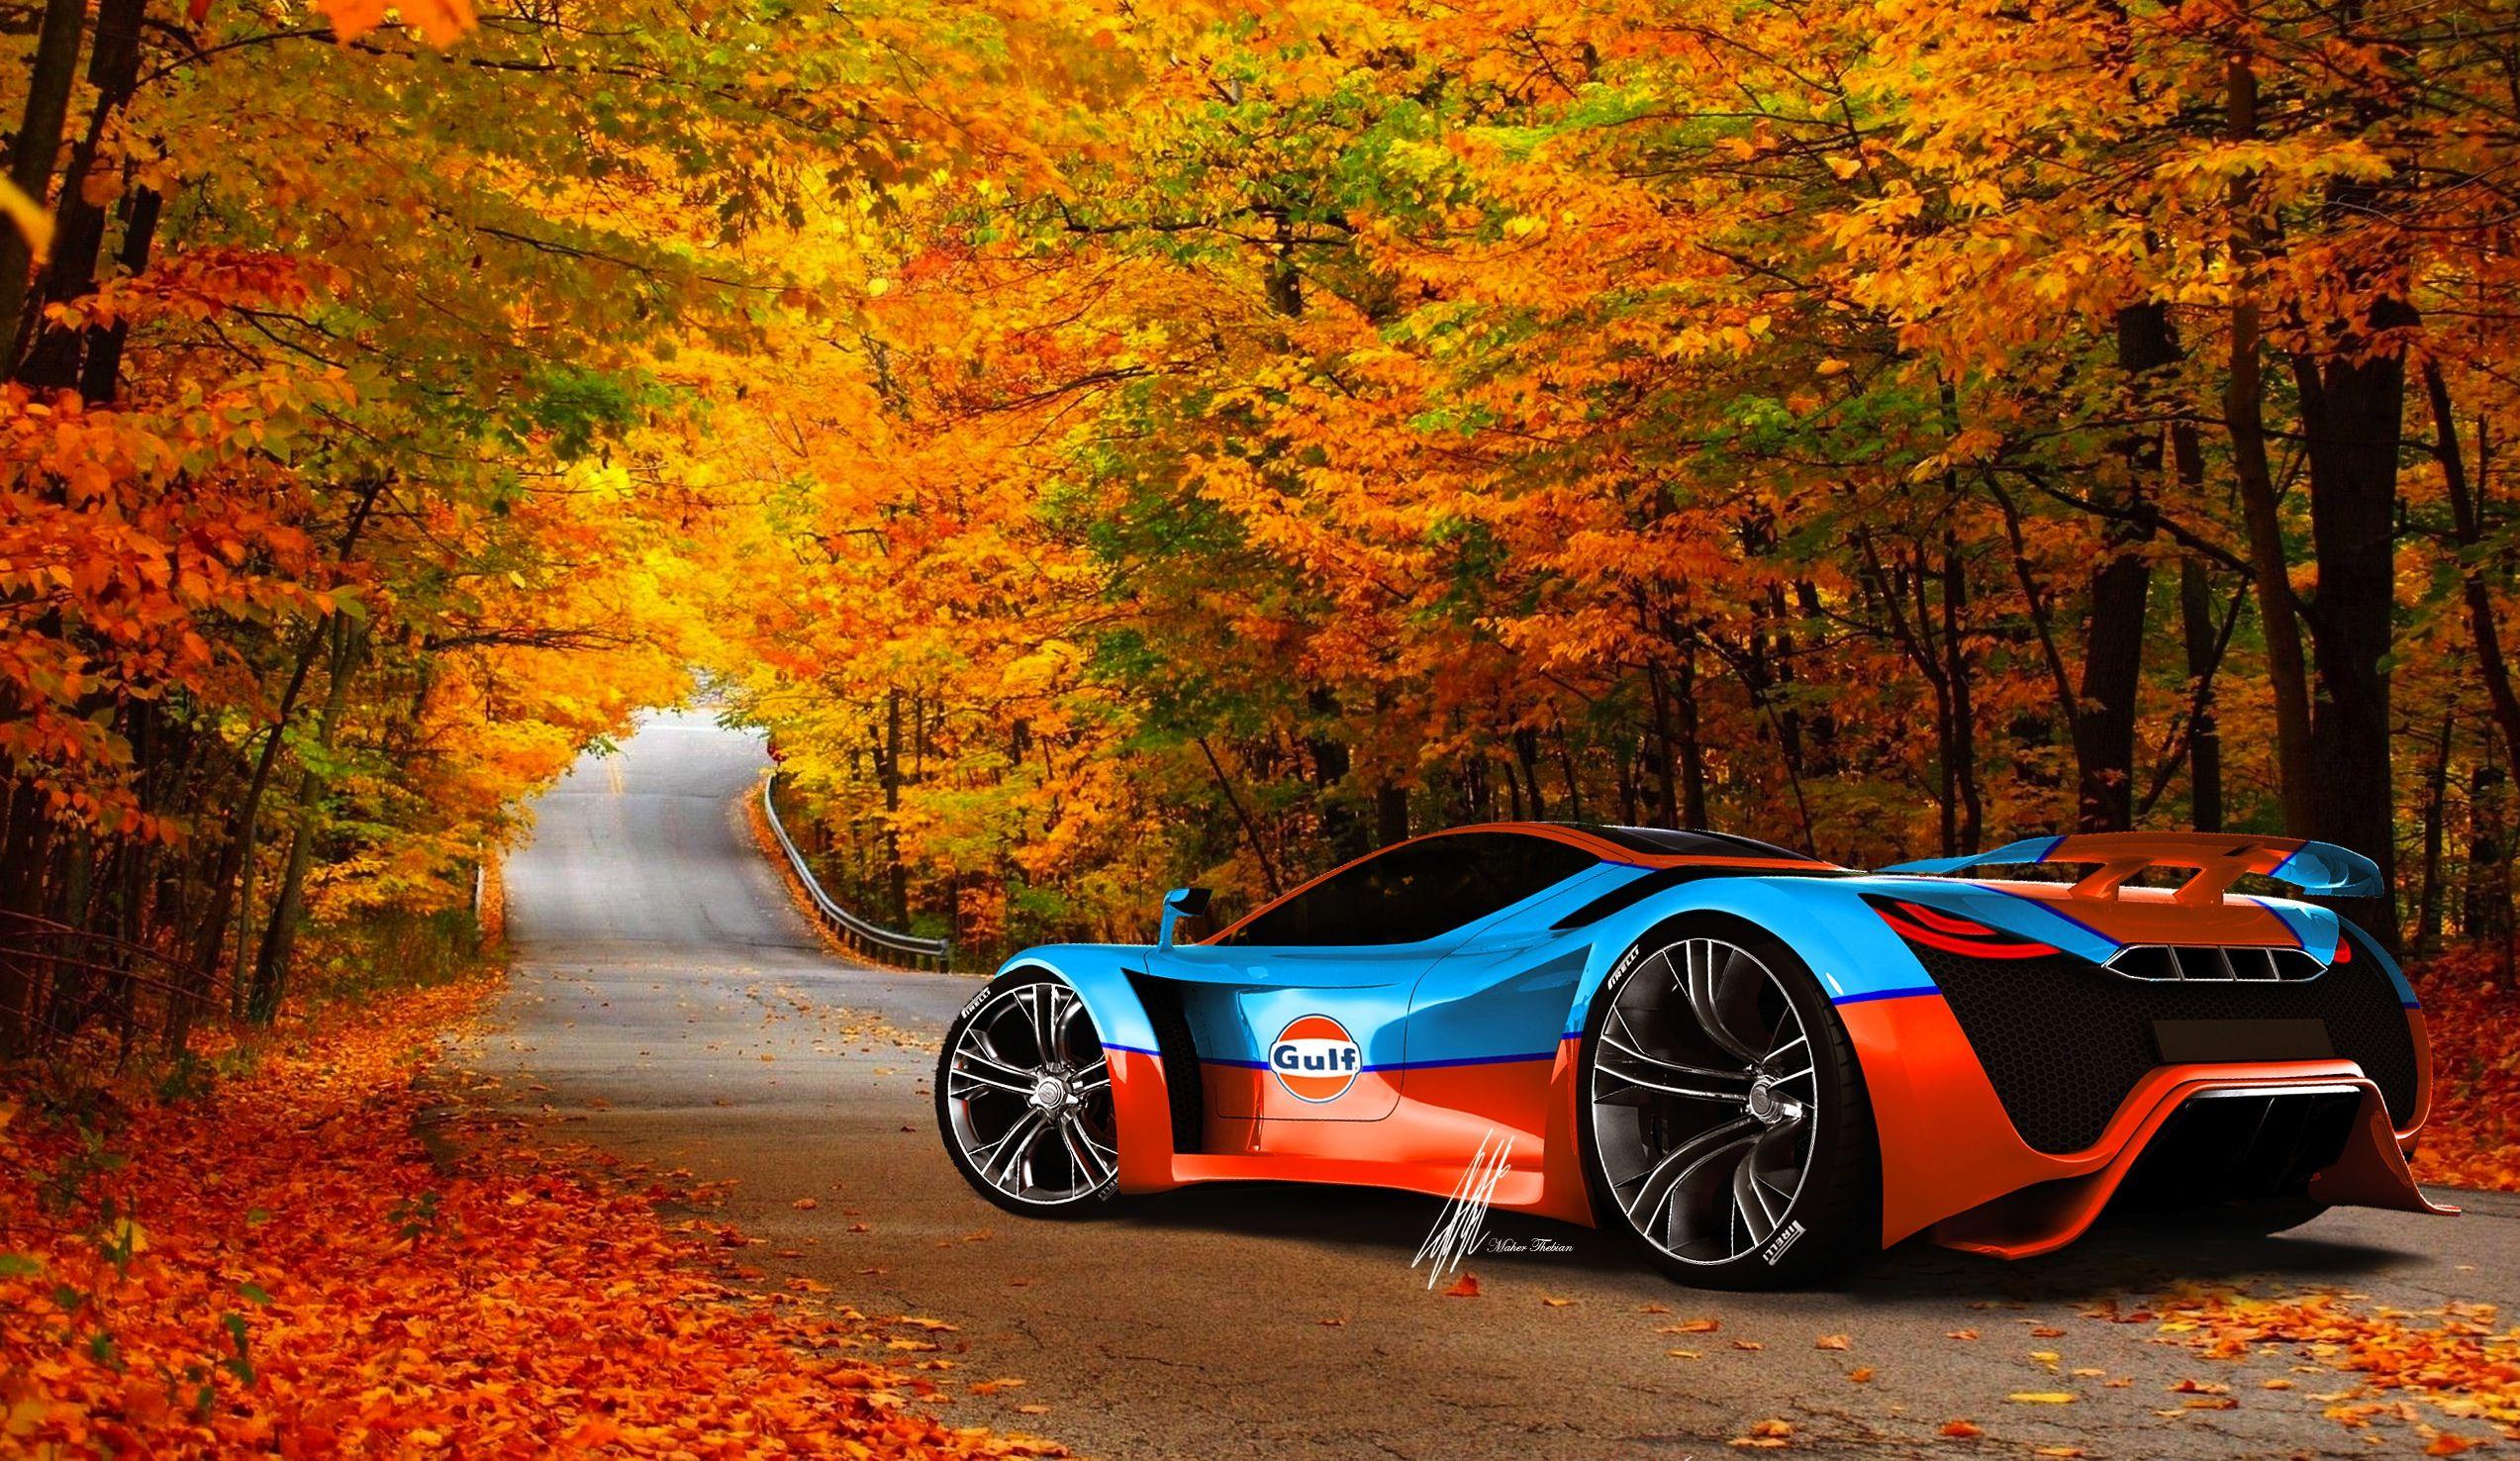 7 Costly cars as iPhone wallpapers